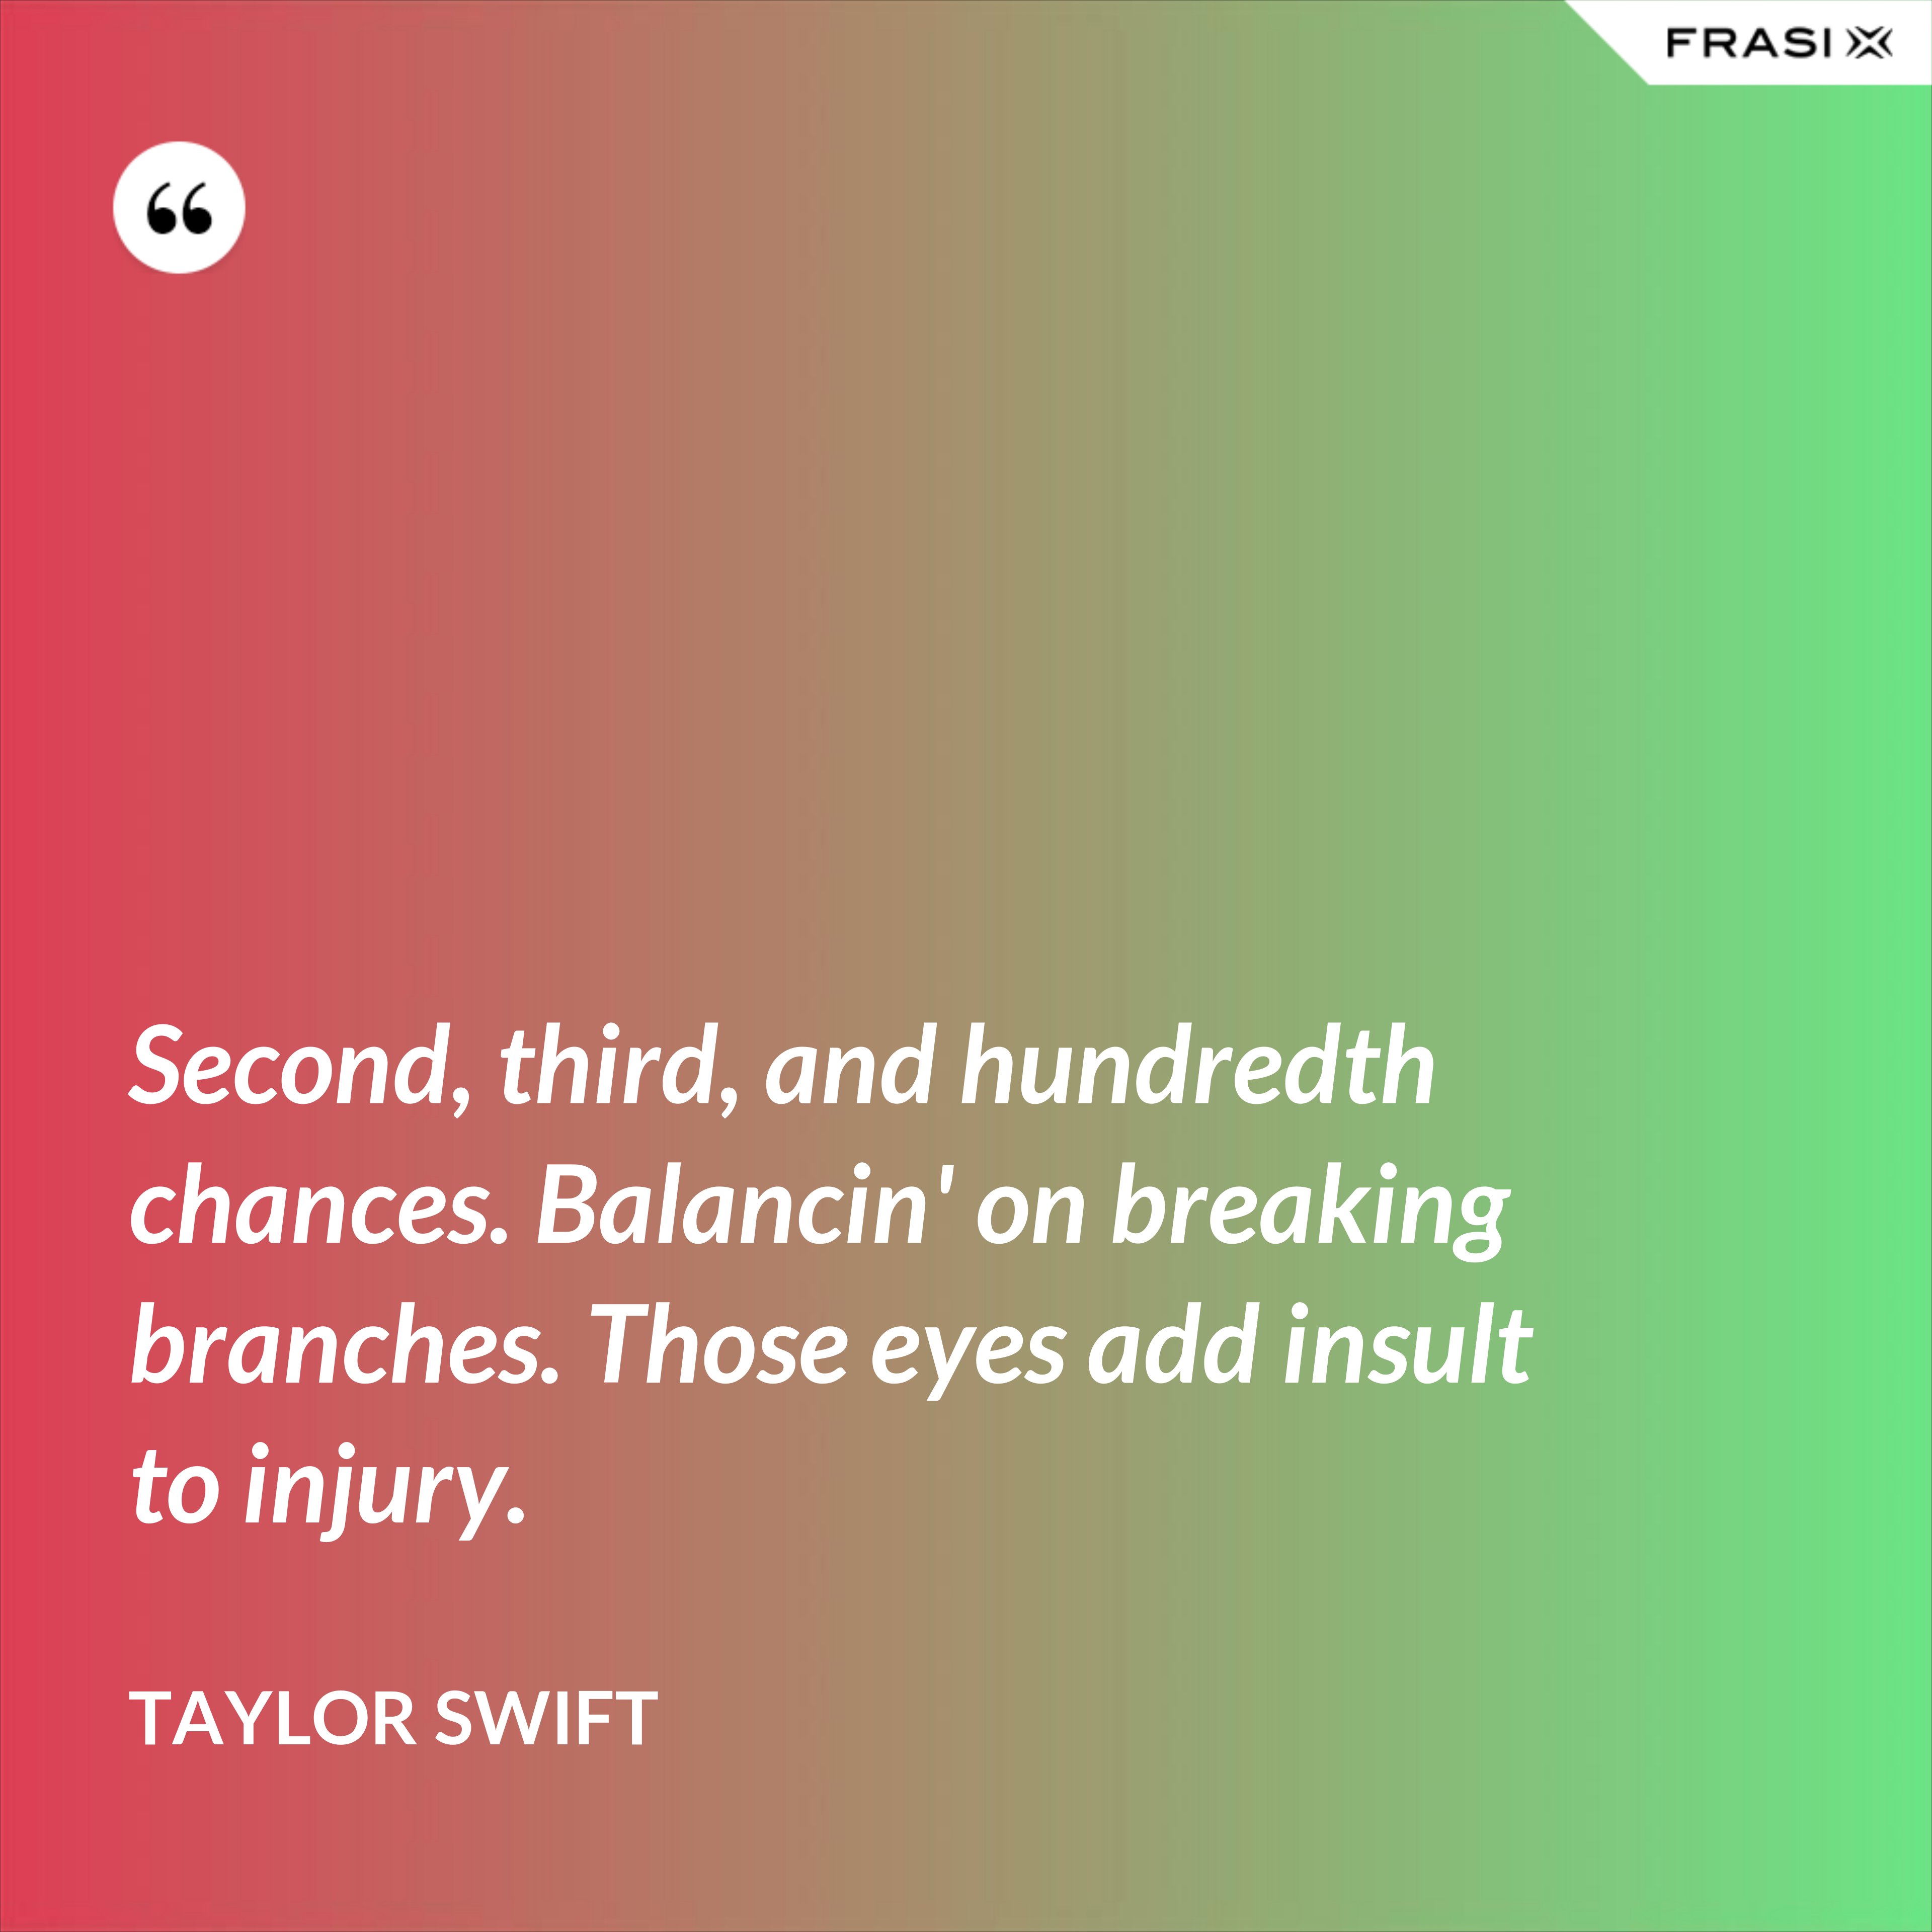 Second, third, and hundredth chances. Balancin' on breaking branches. Those eyes add insult to injury. - Taylor Swift